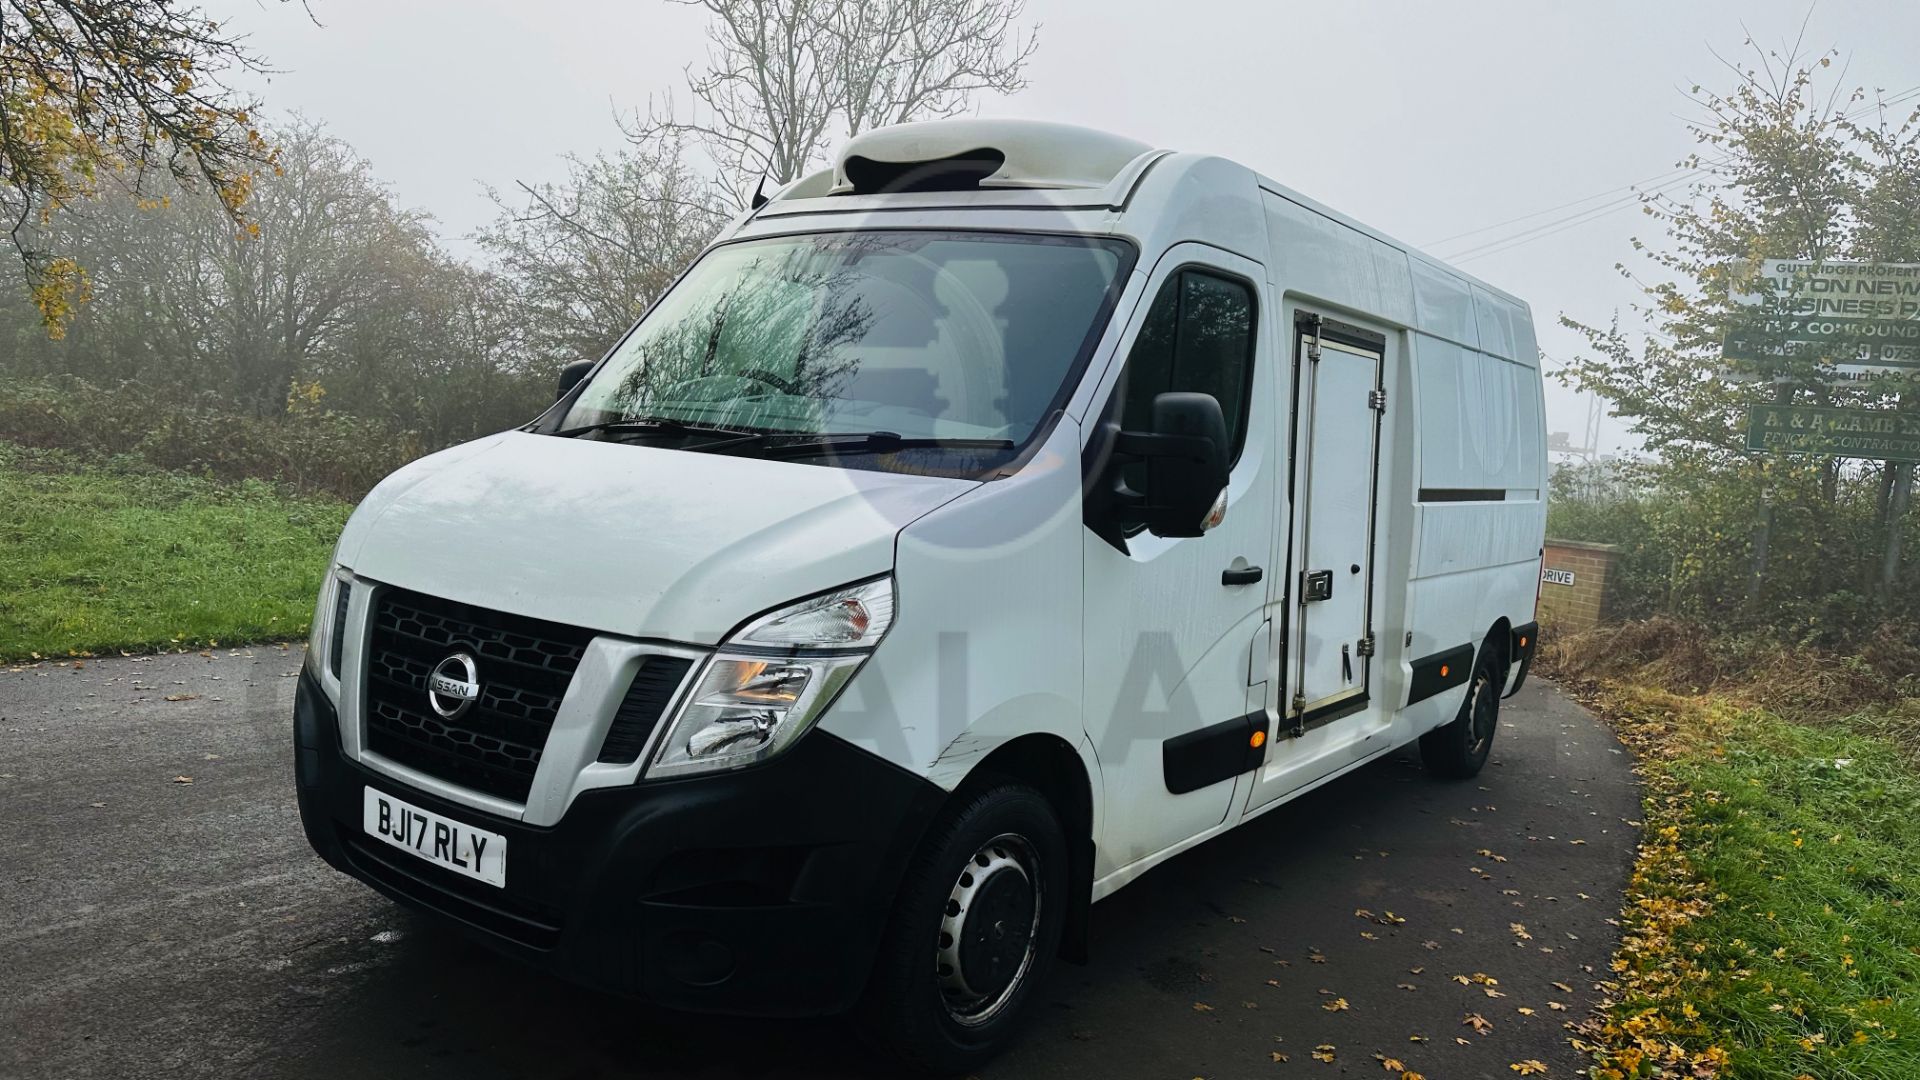 (ON SALE) NISSAN NV400 *LWB - REFRIGERATED VAN* (2017 - EURO 6) 2.3 DCI (3500 KG) *1 OWNER FROM NEW* - Image 5 of 40